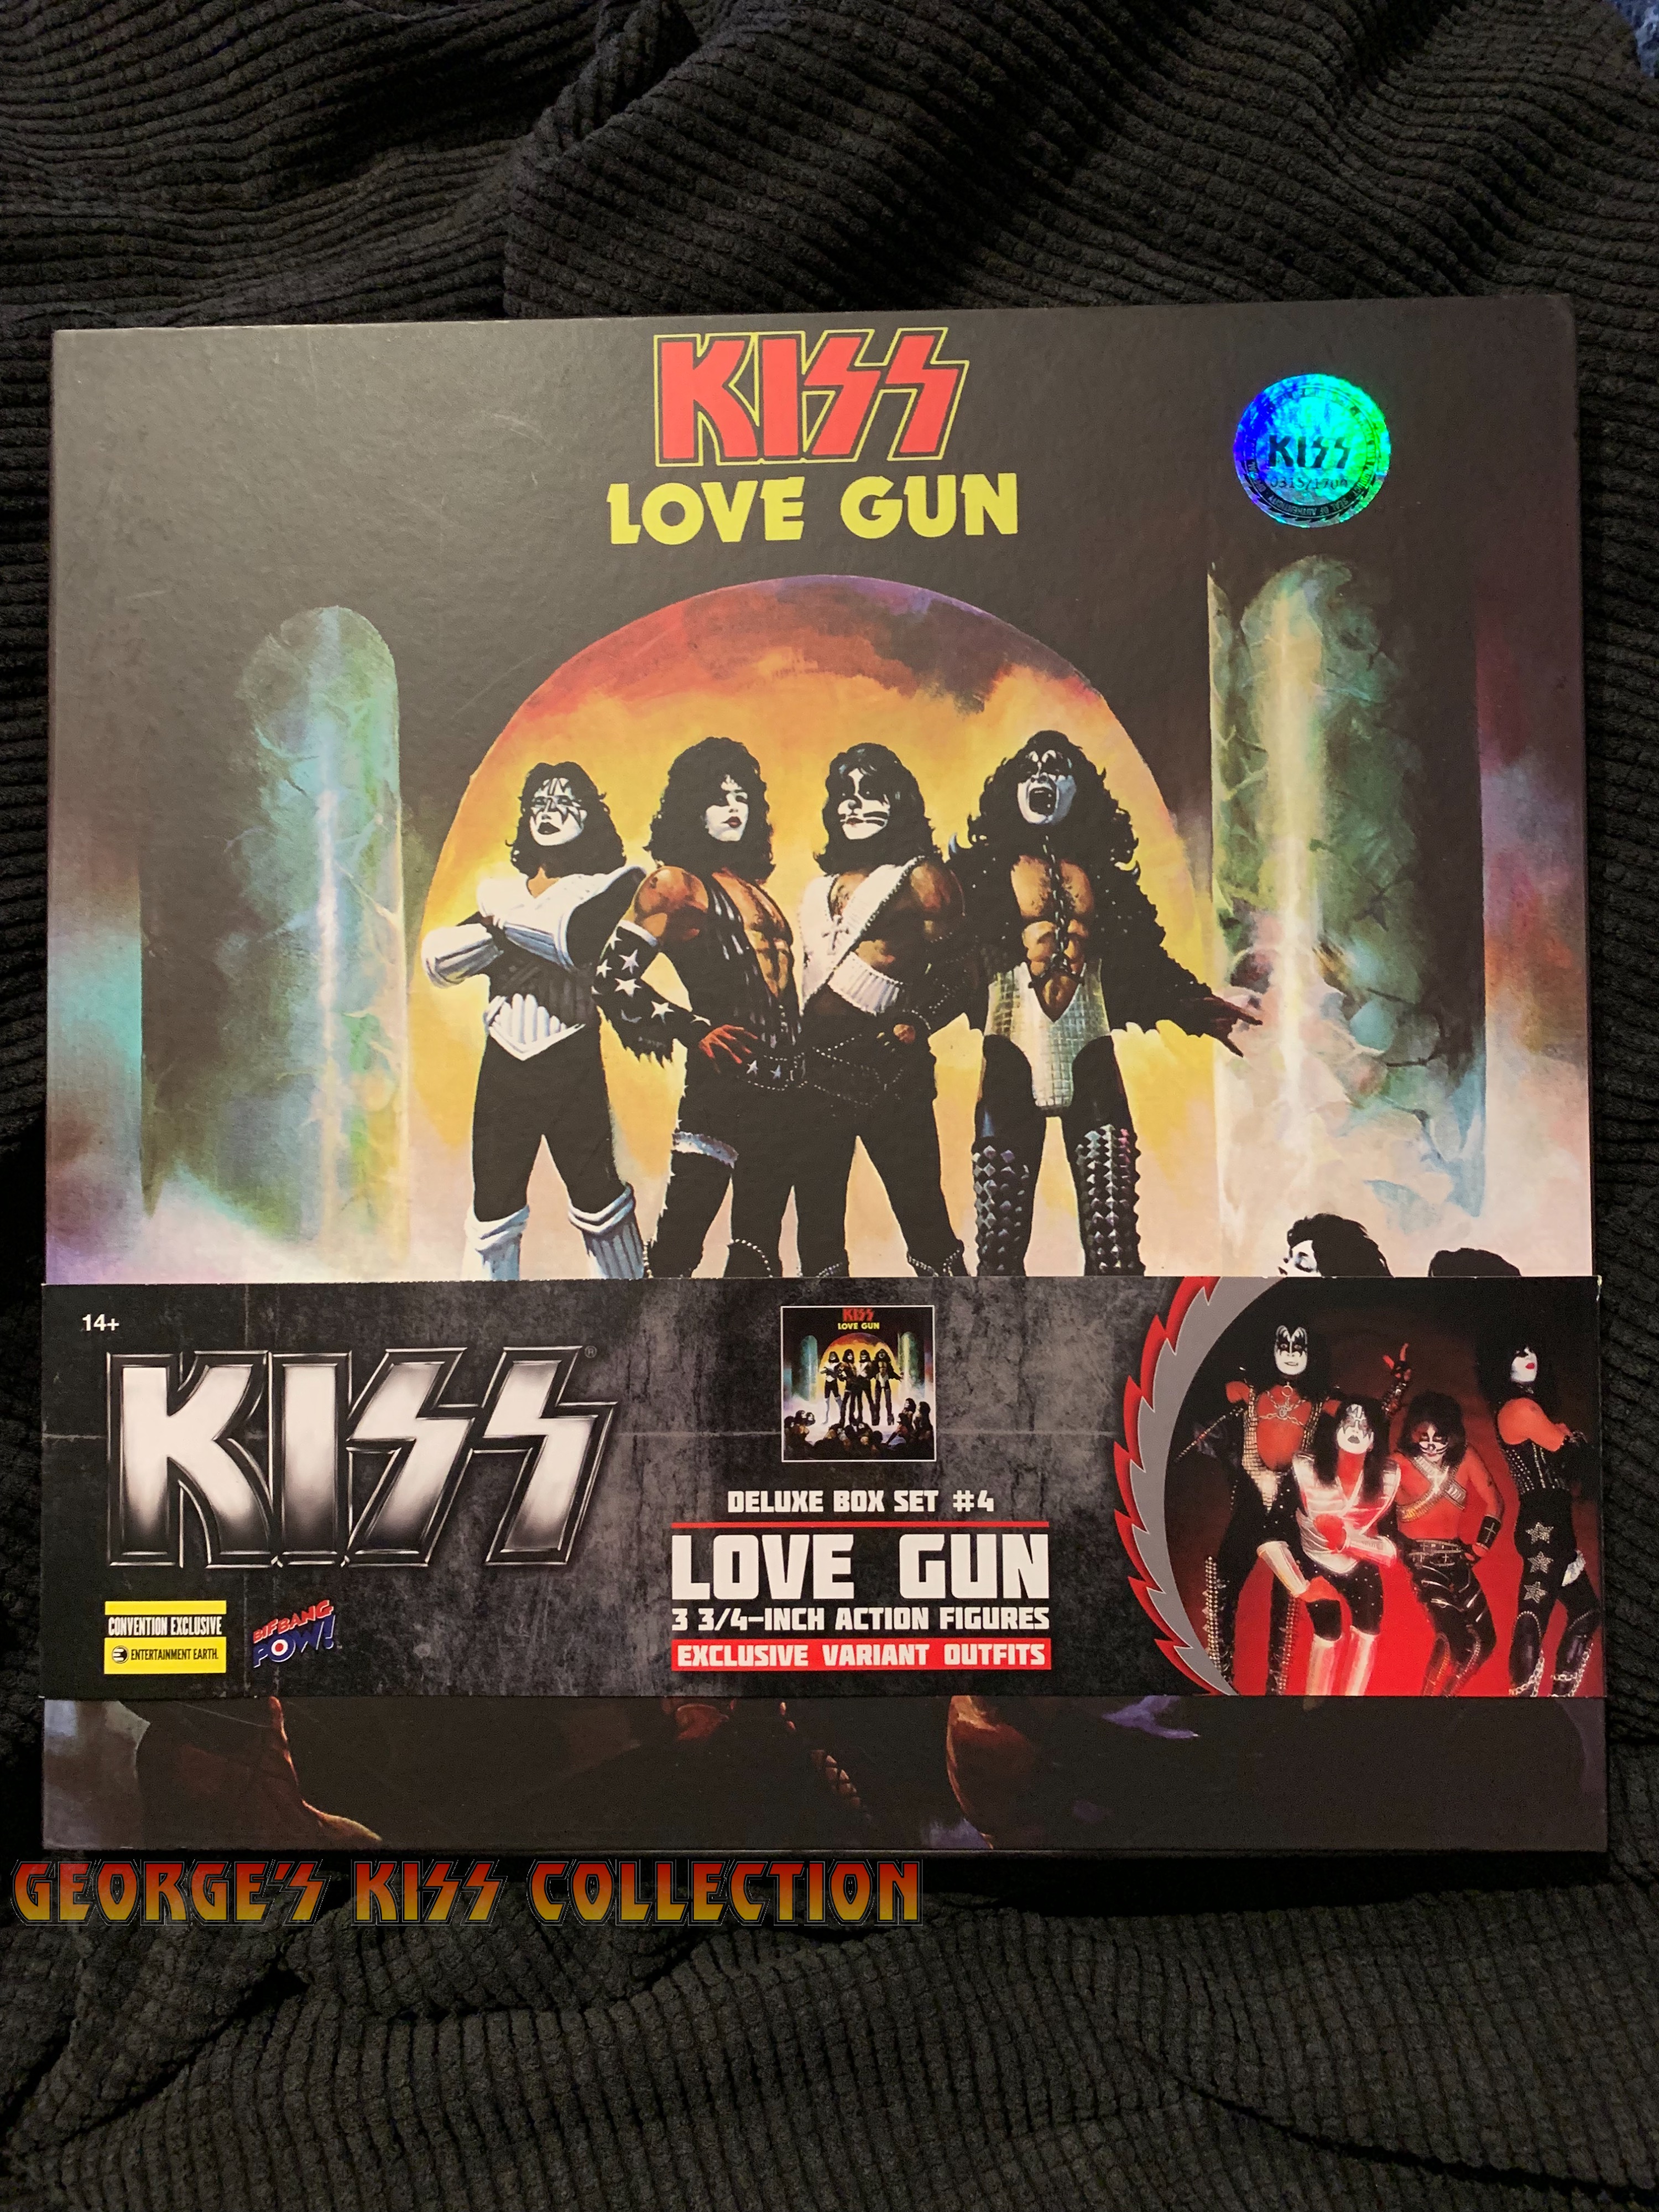 KISS Love Gun 3 3/4-Inch Action Figure Deluxe Box Set - Convention